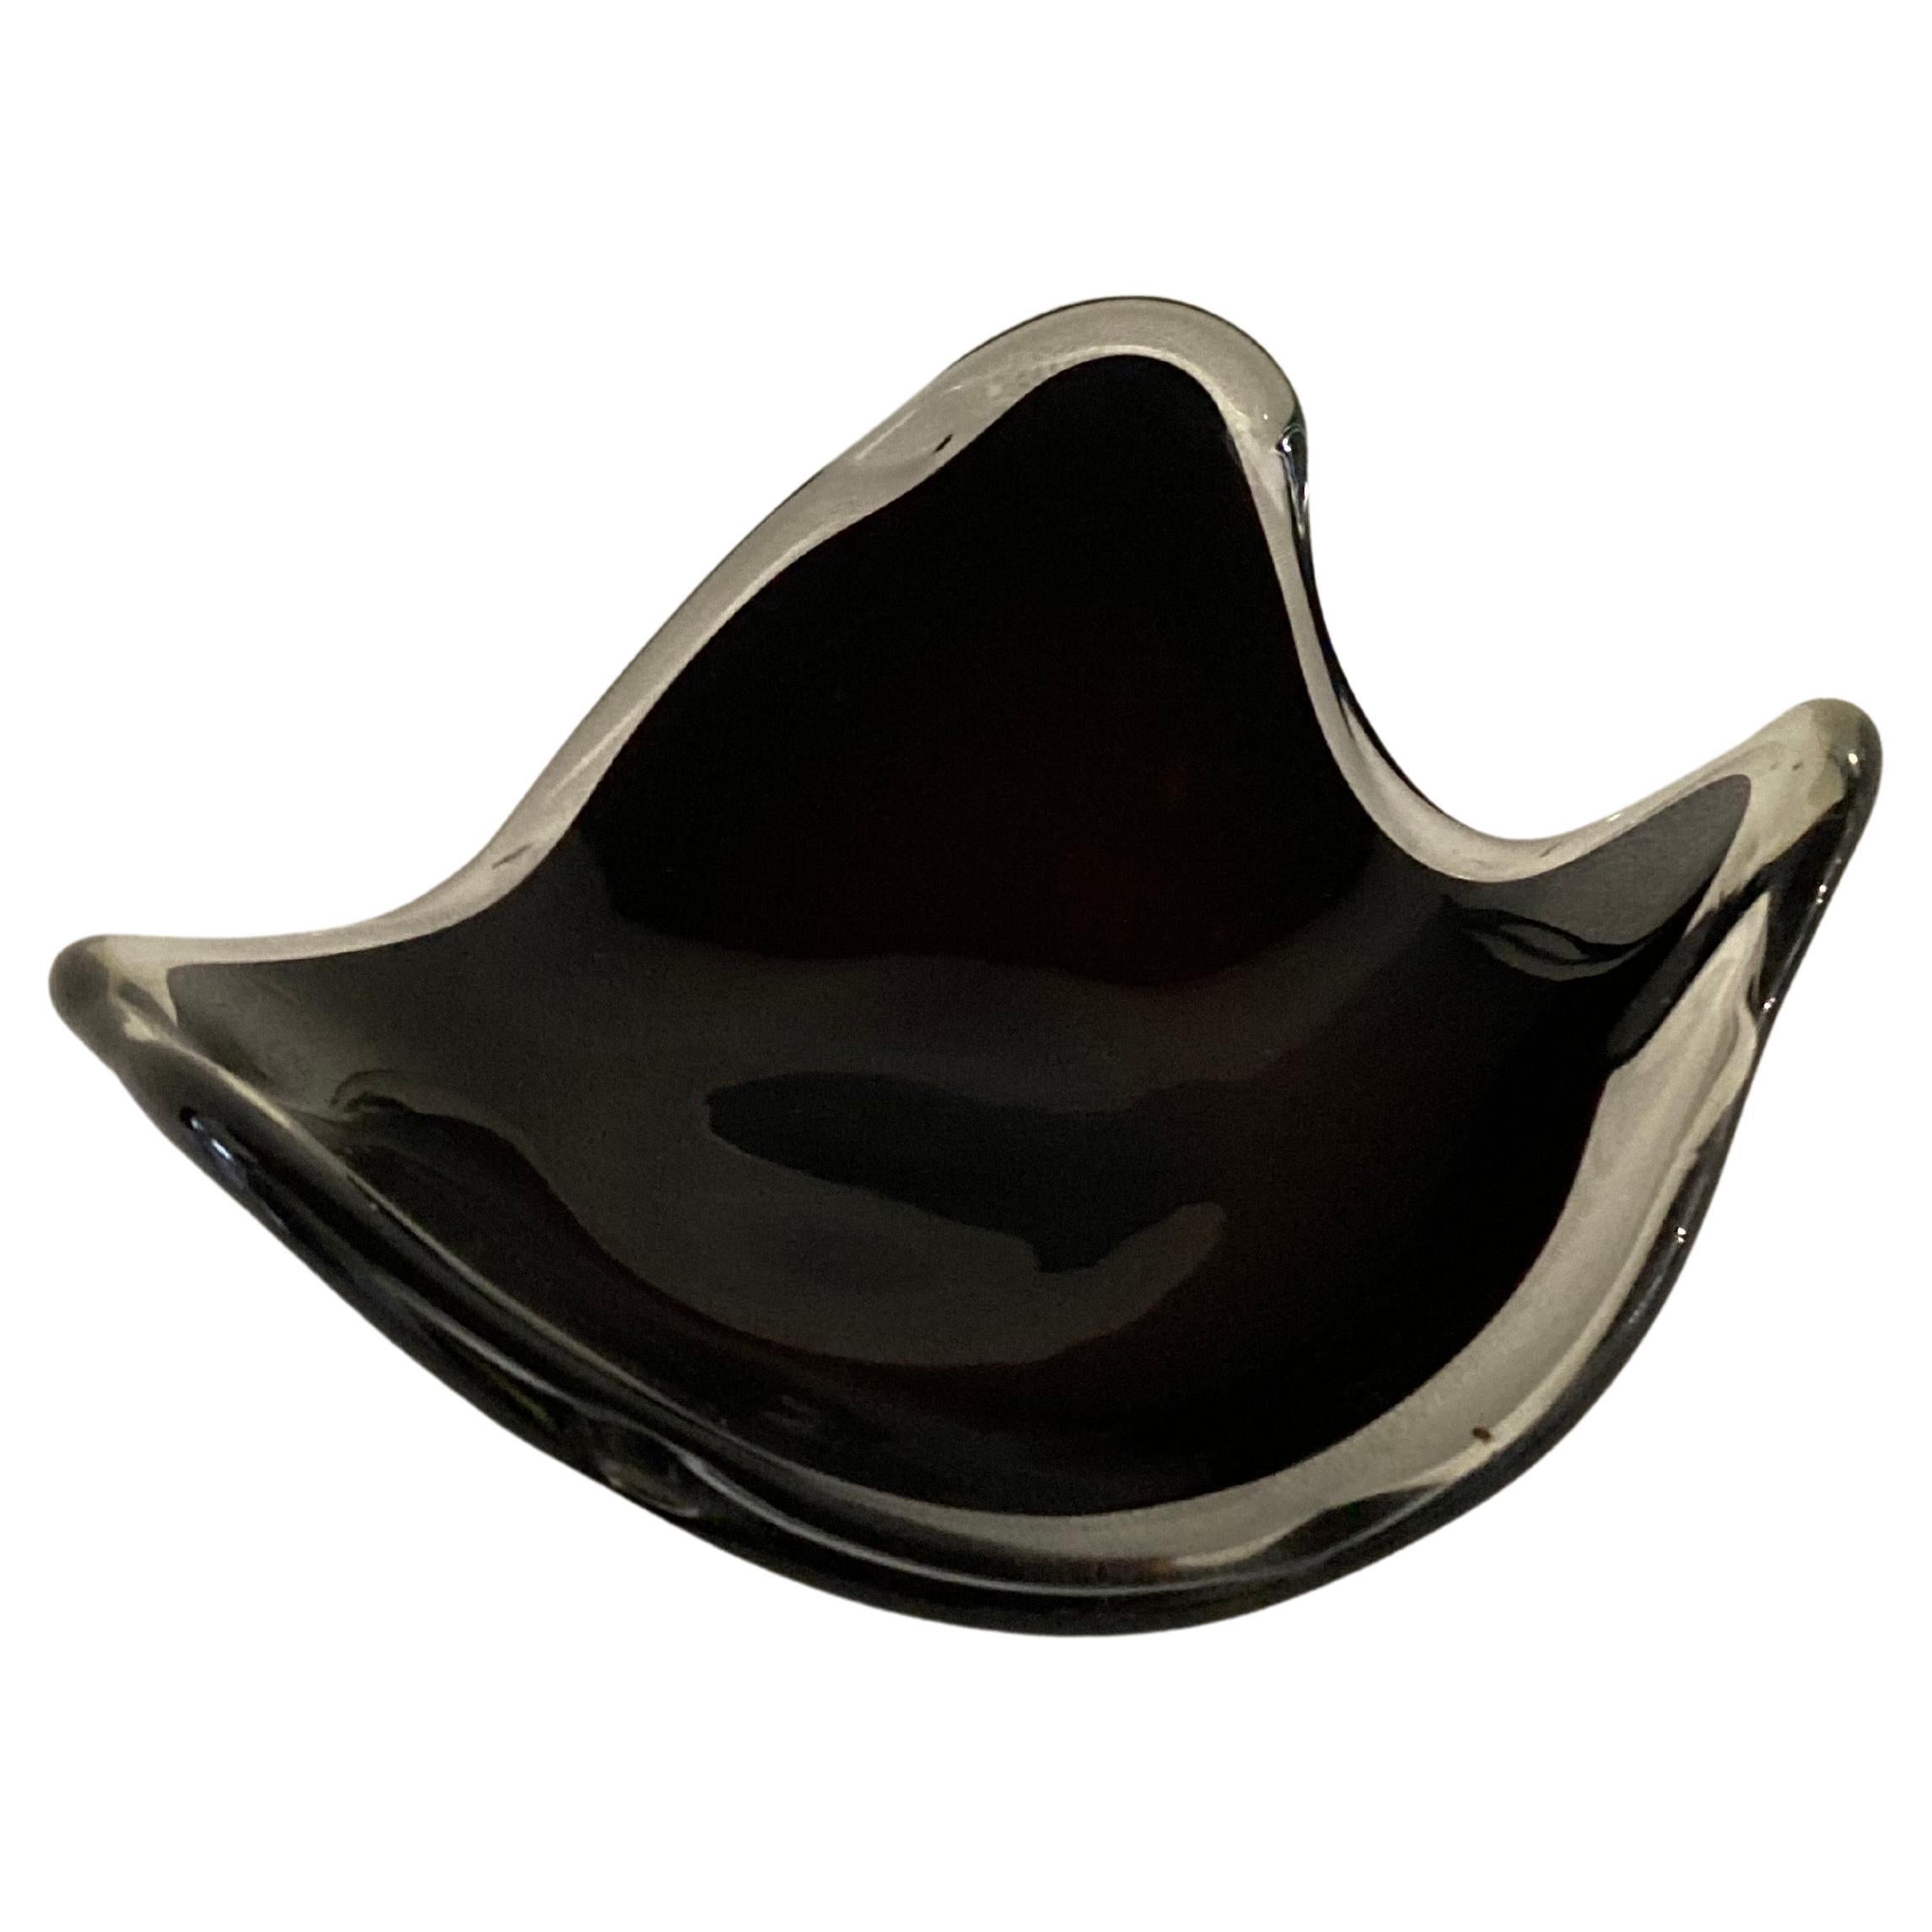 A 1960s Italian Murano dark purple clear case centrepiece dish in the shape reminiscent of a manta ray.

The island of Murano in Venice, Italy is renowned for its very long tradition of glass-making, which begun in 1291.
By the 20th century,